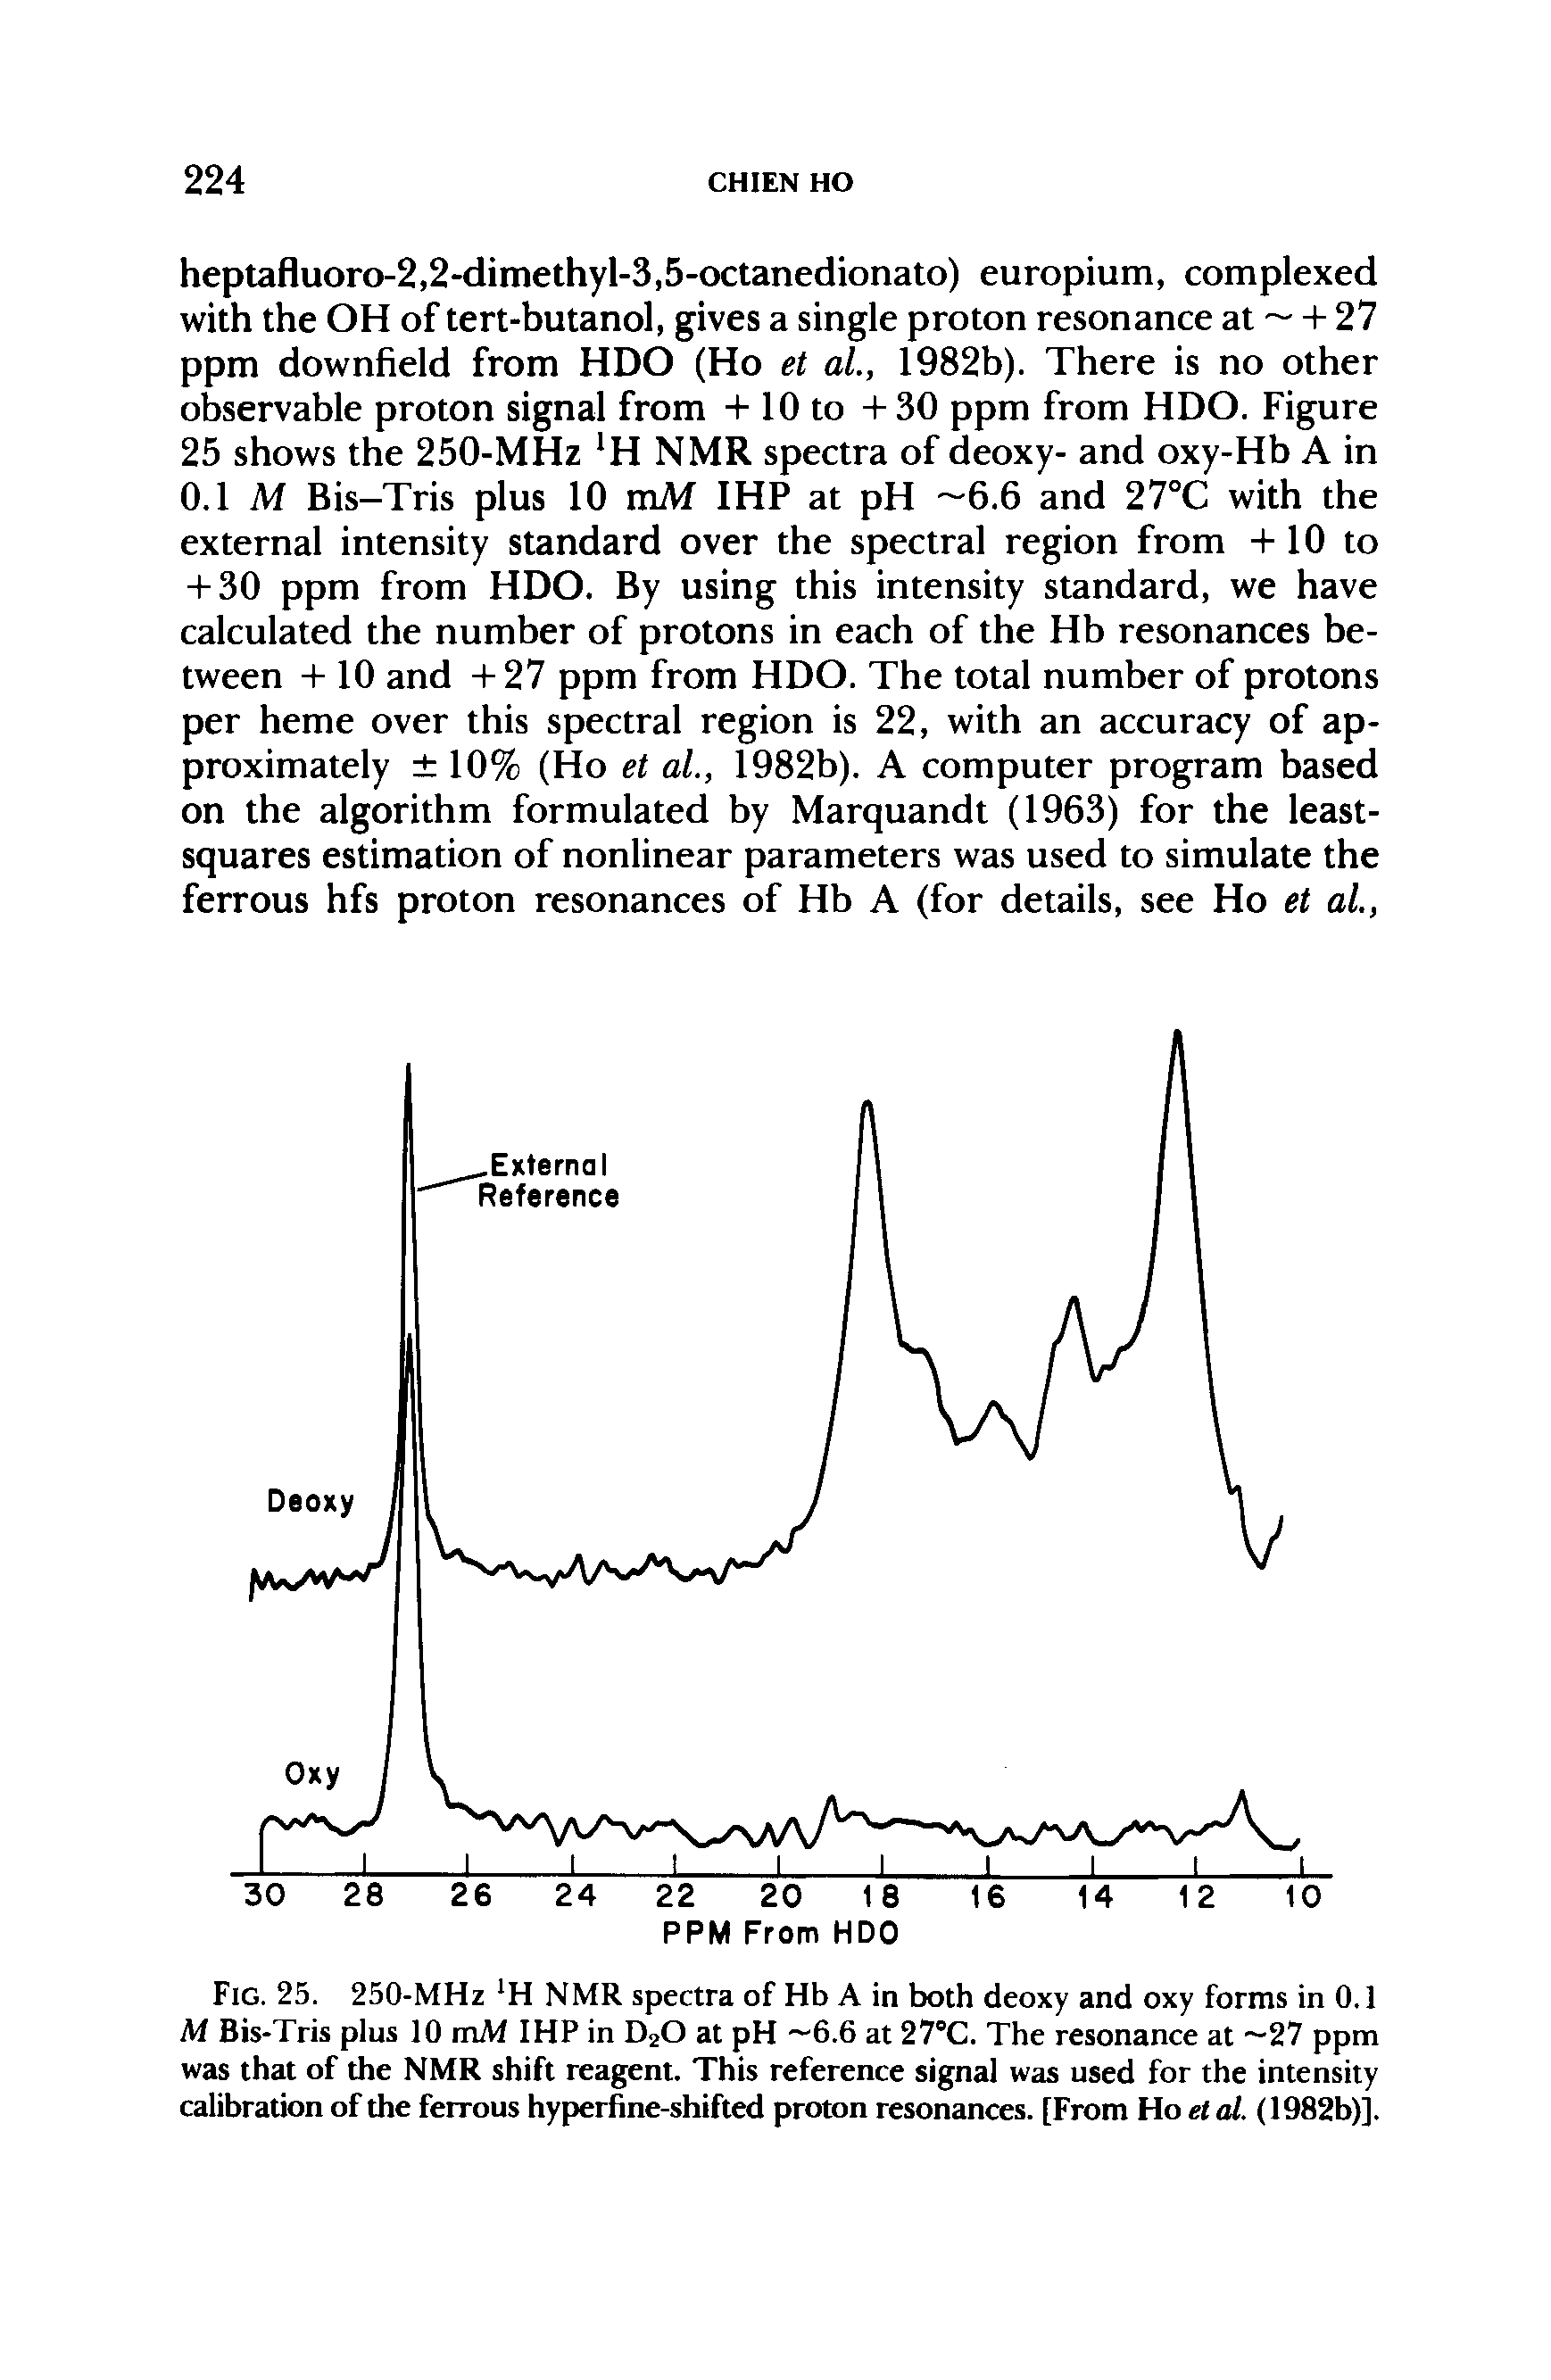 Fig. 25. 250-MHz H NMR spectra of Hb A in both deoxy and oxy forms in 0.1 M Bis-Tris plus 10 mM IHP in D20 at pH 6.6 at 27°C. The resonance at 27 ppm was that of the NMR shift reagent. This reference signal was used for the intensity calibration of the ferrous hyperfine-shifted proton resonances. [From Ho et al. (1982b)].